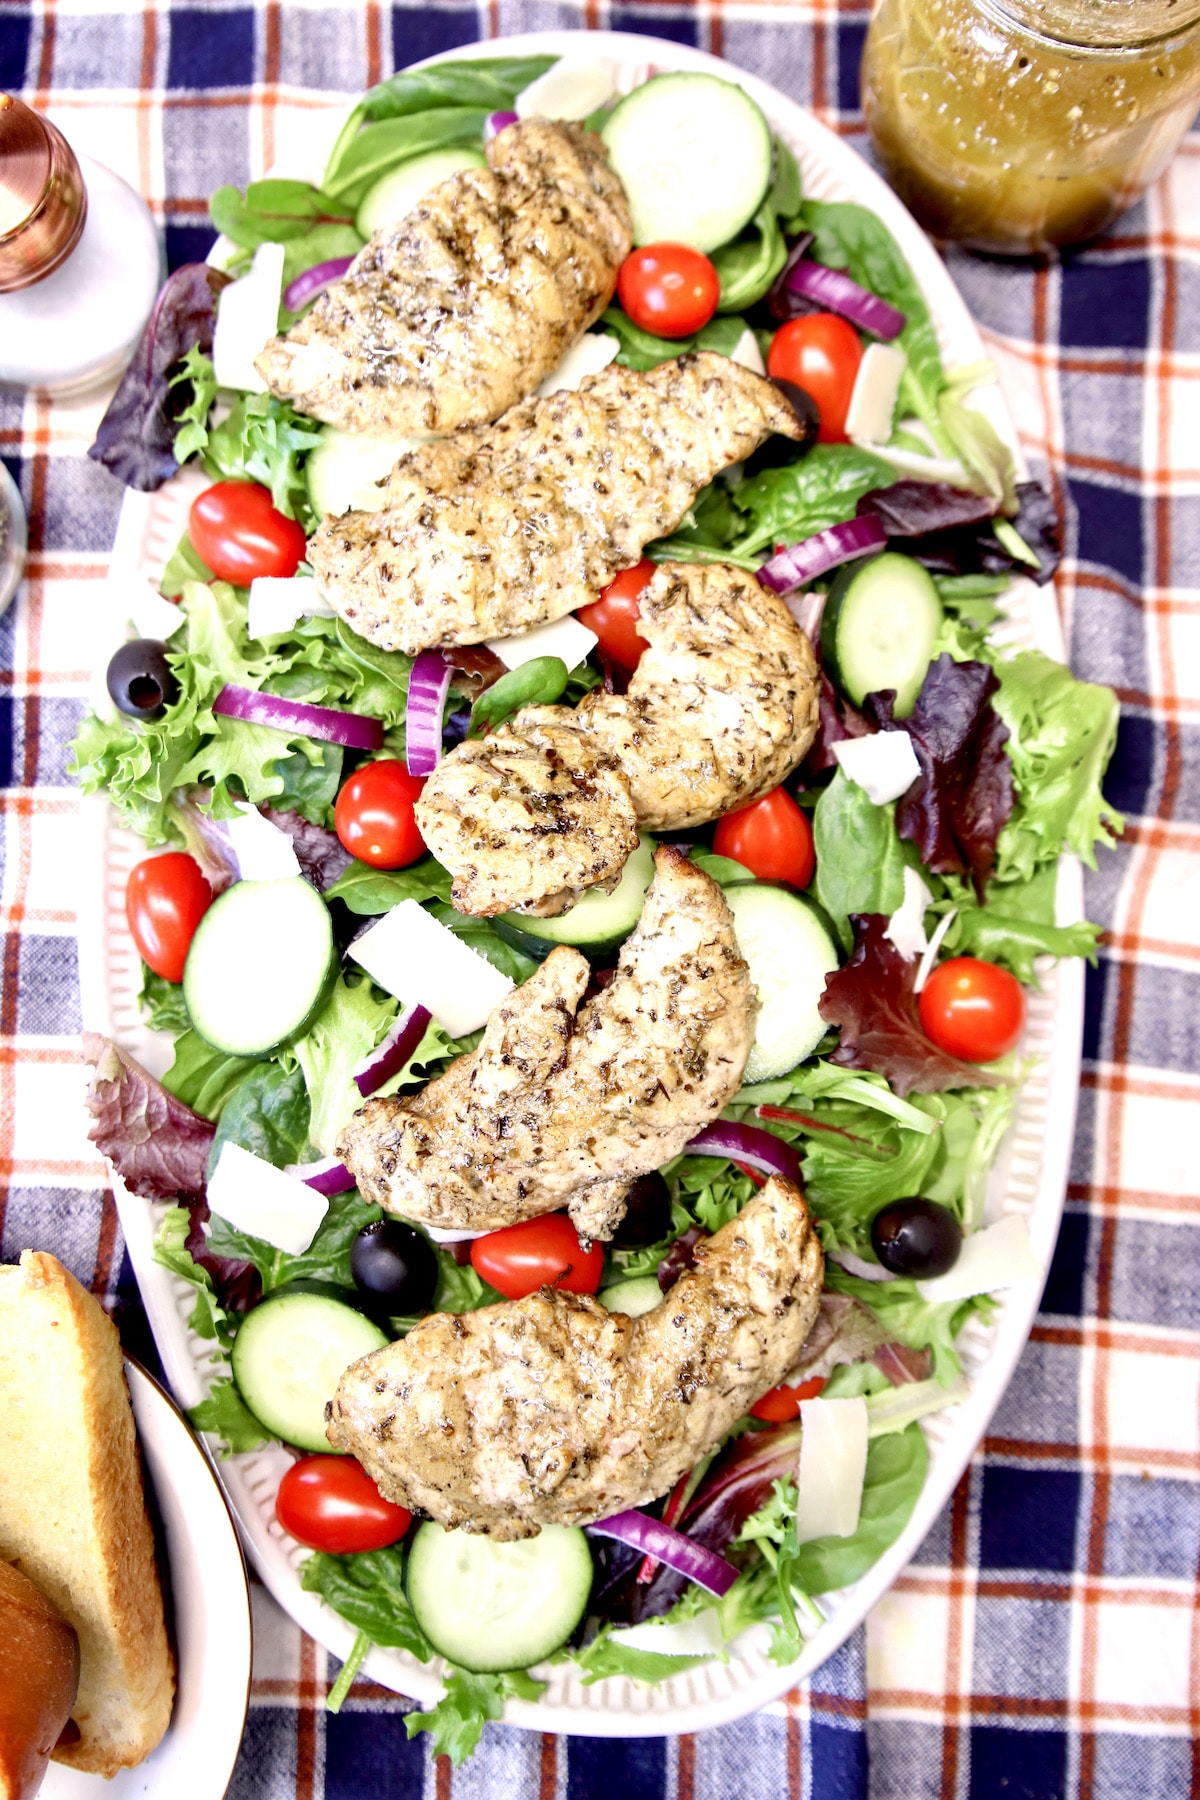 Overhead view of platter of salad with grilled chicken, tomatoes, cucumbers, black olives.